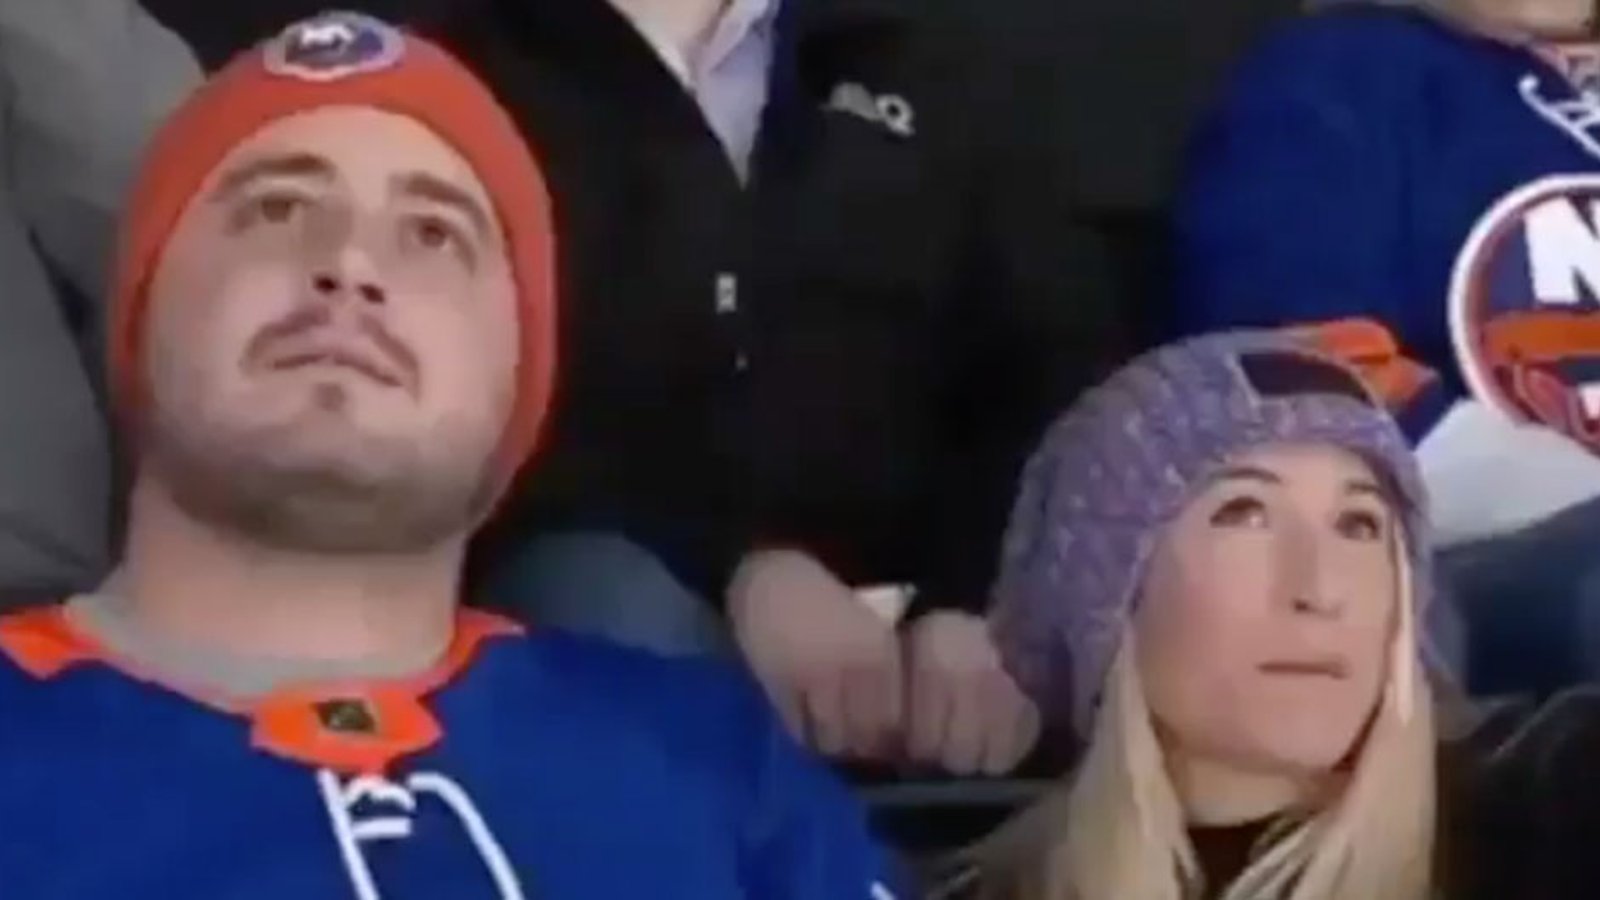 Isles fan pranks girlfriend with fake proposal on the Kiss Cam